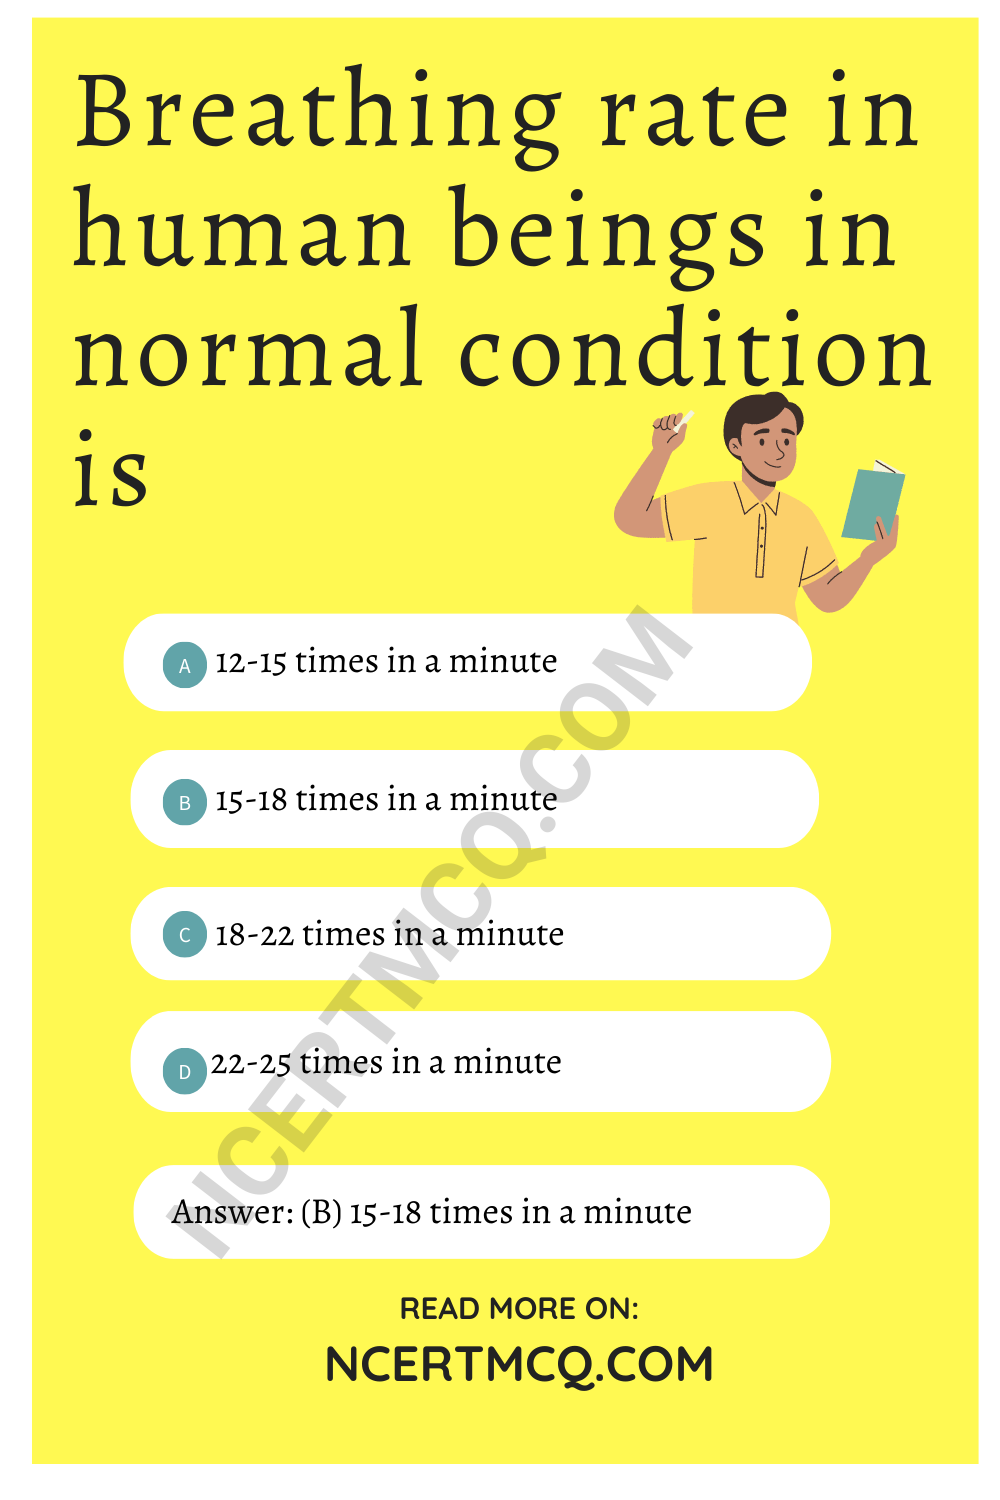 Breathing rate in human beings in normal condition is